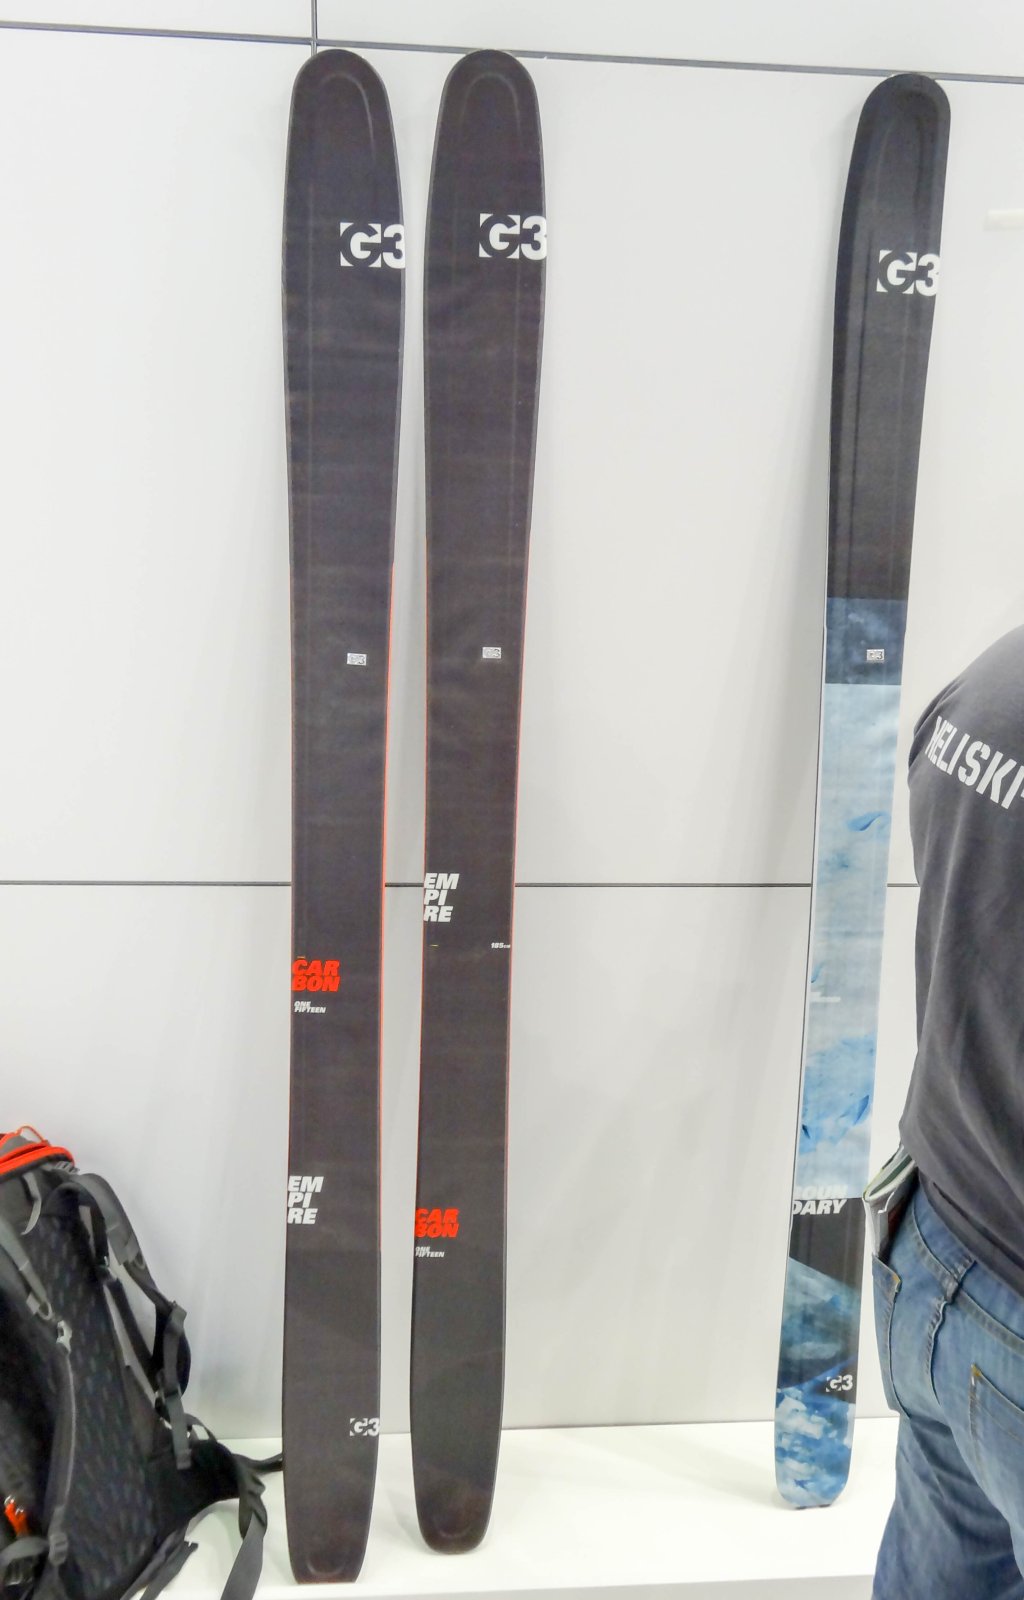 G3 Empire: Carbon skis with 115 center width